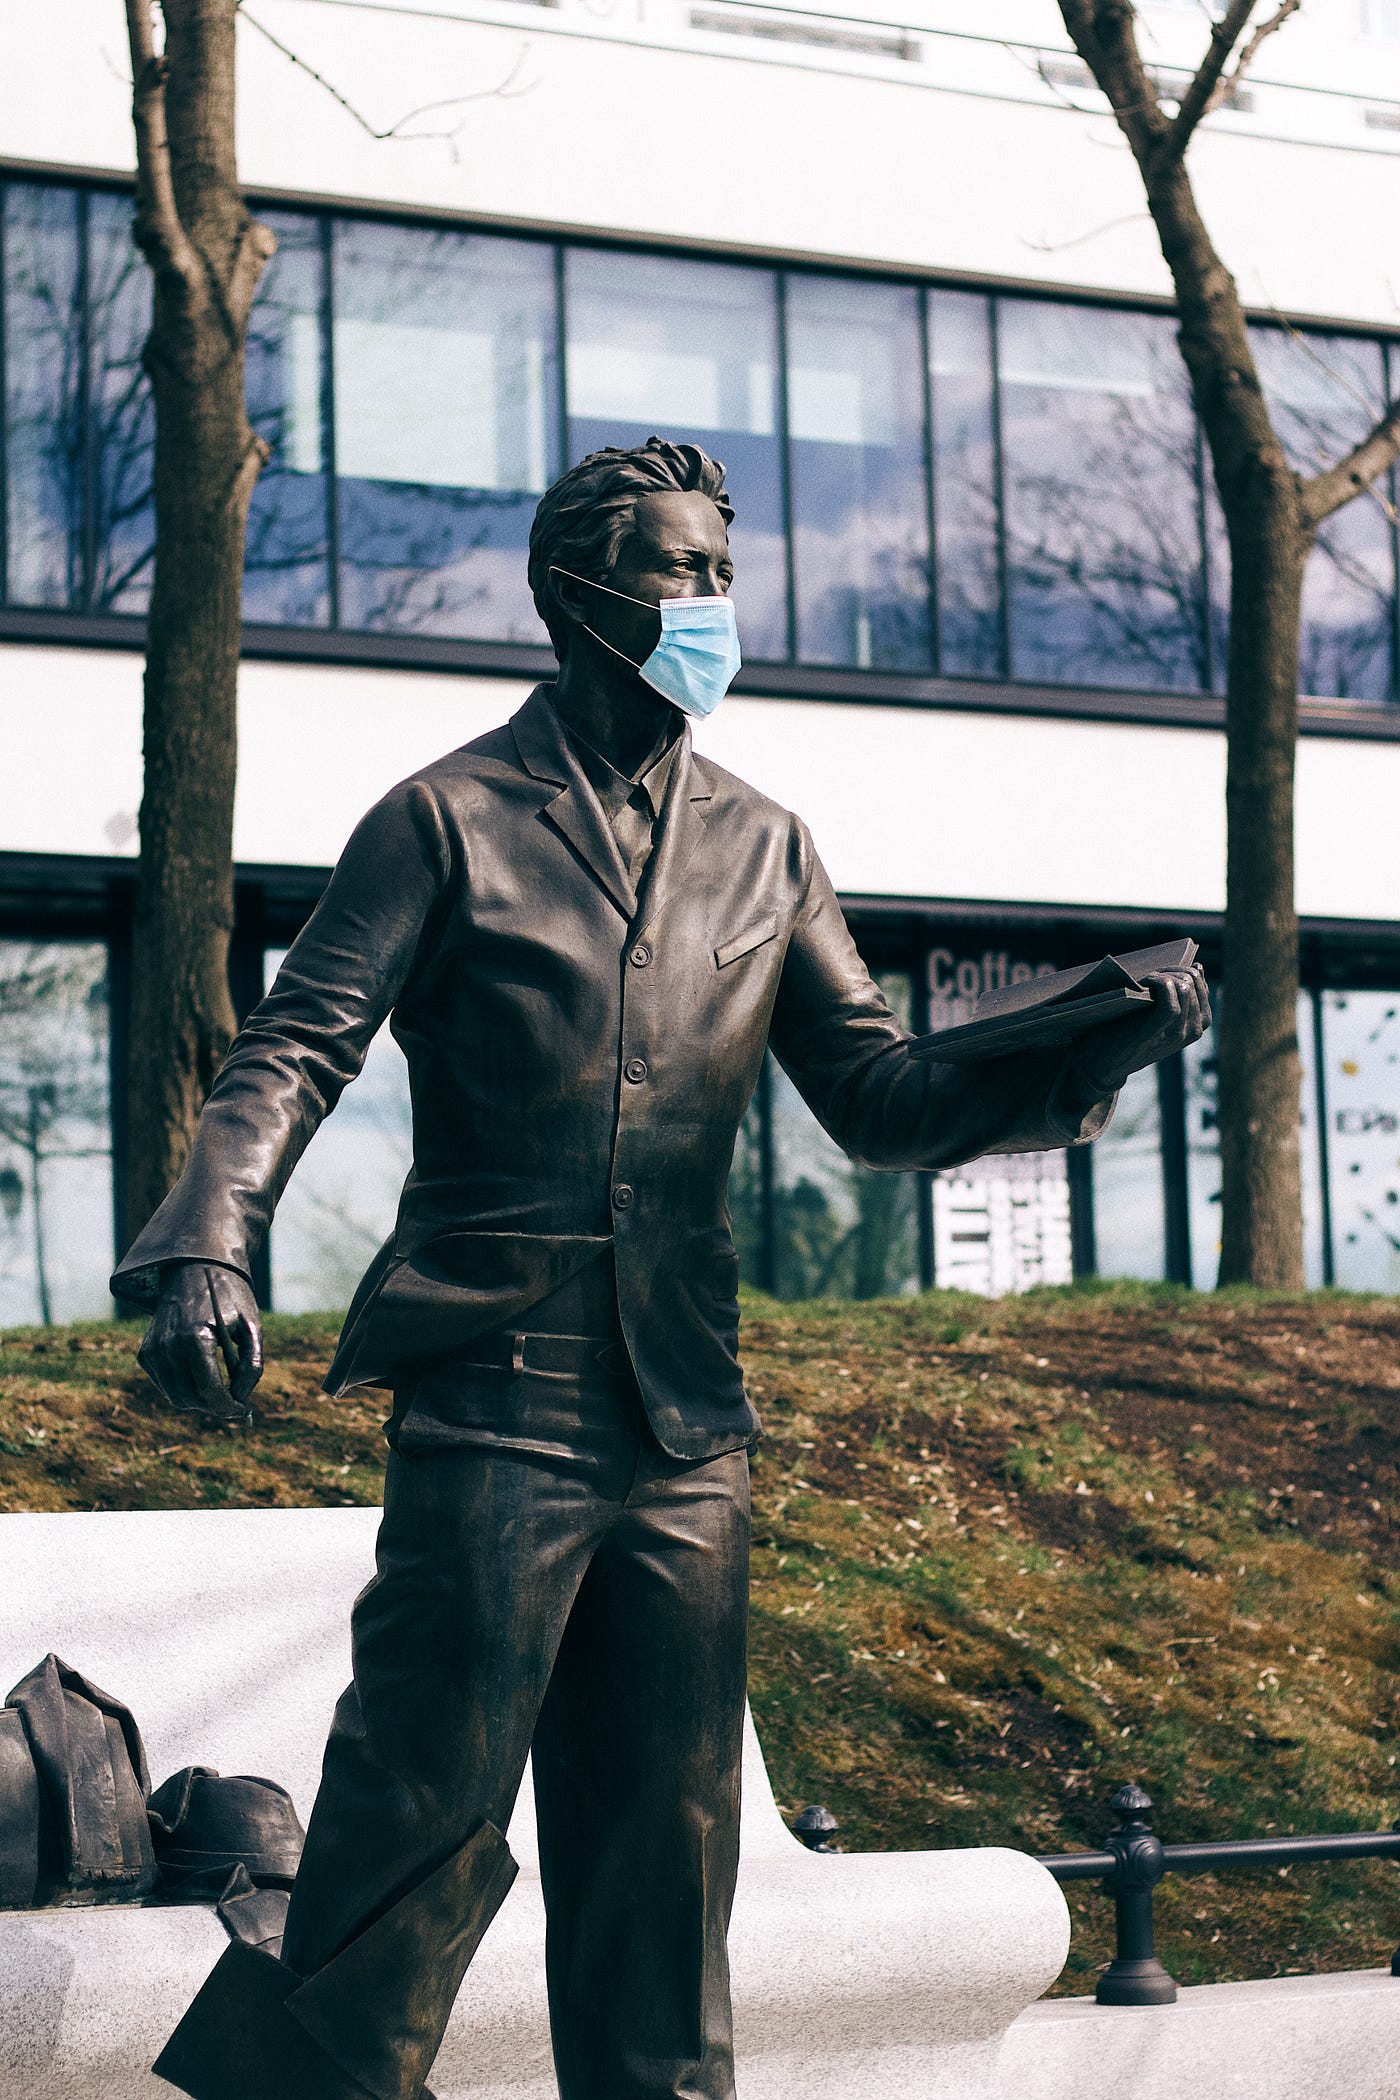 A statue wears a mask during the onset of the Covid pandemic in 2020